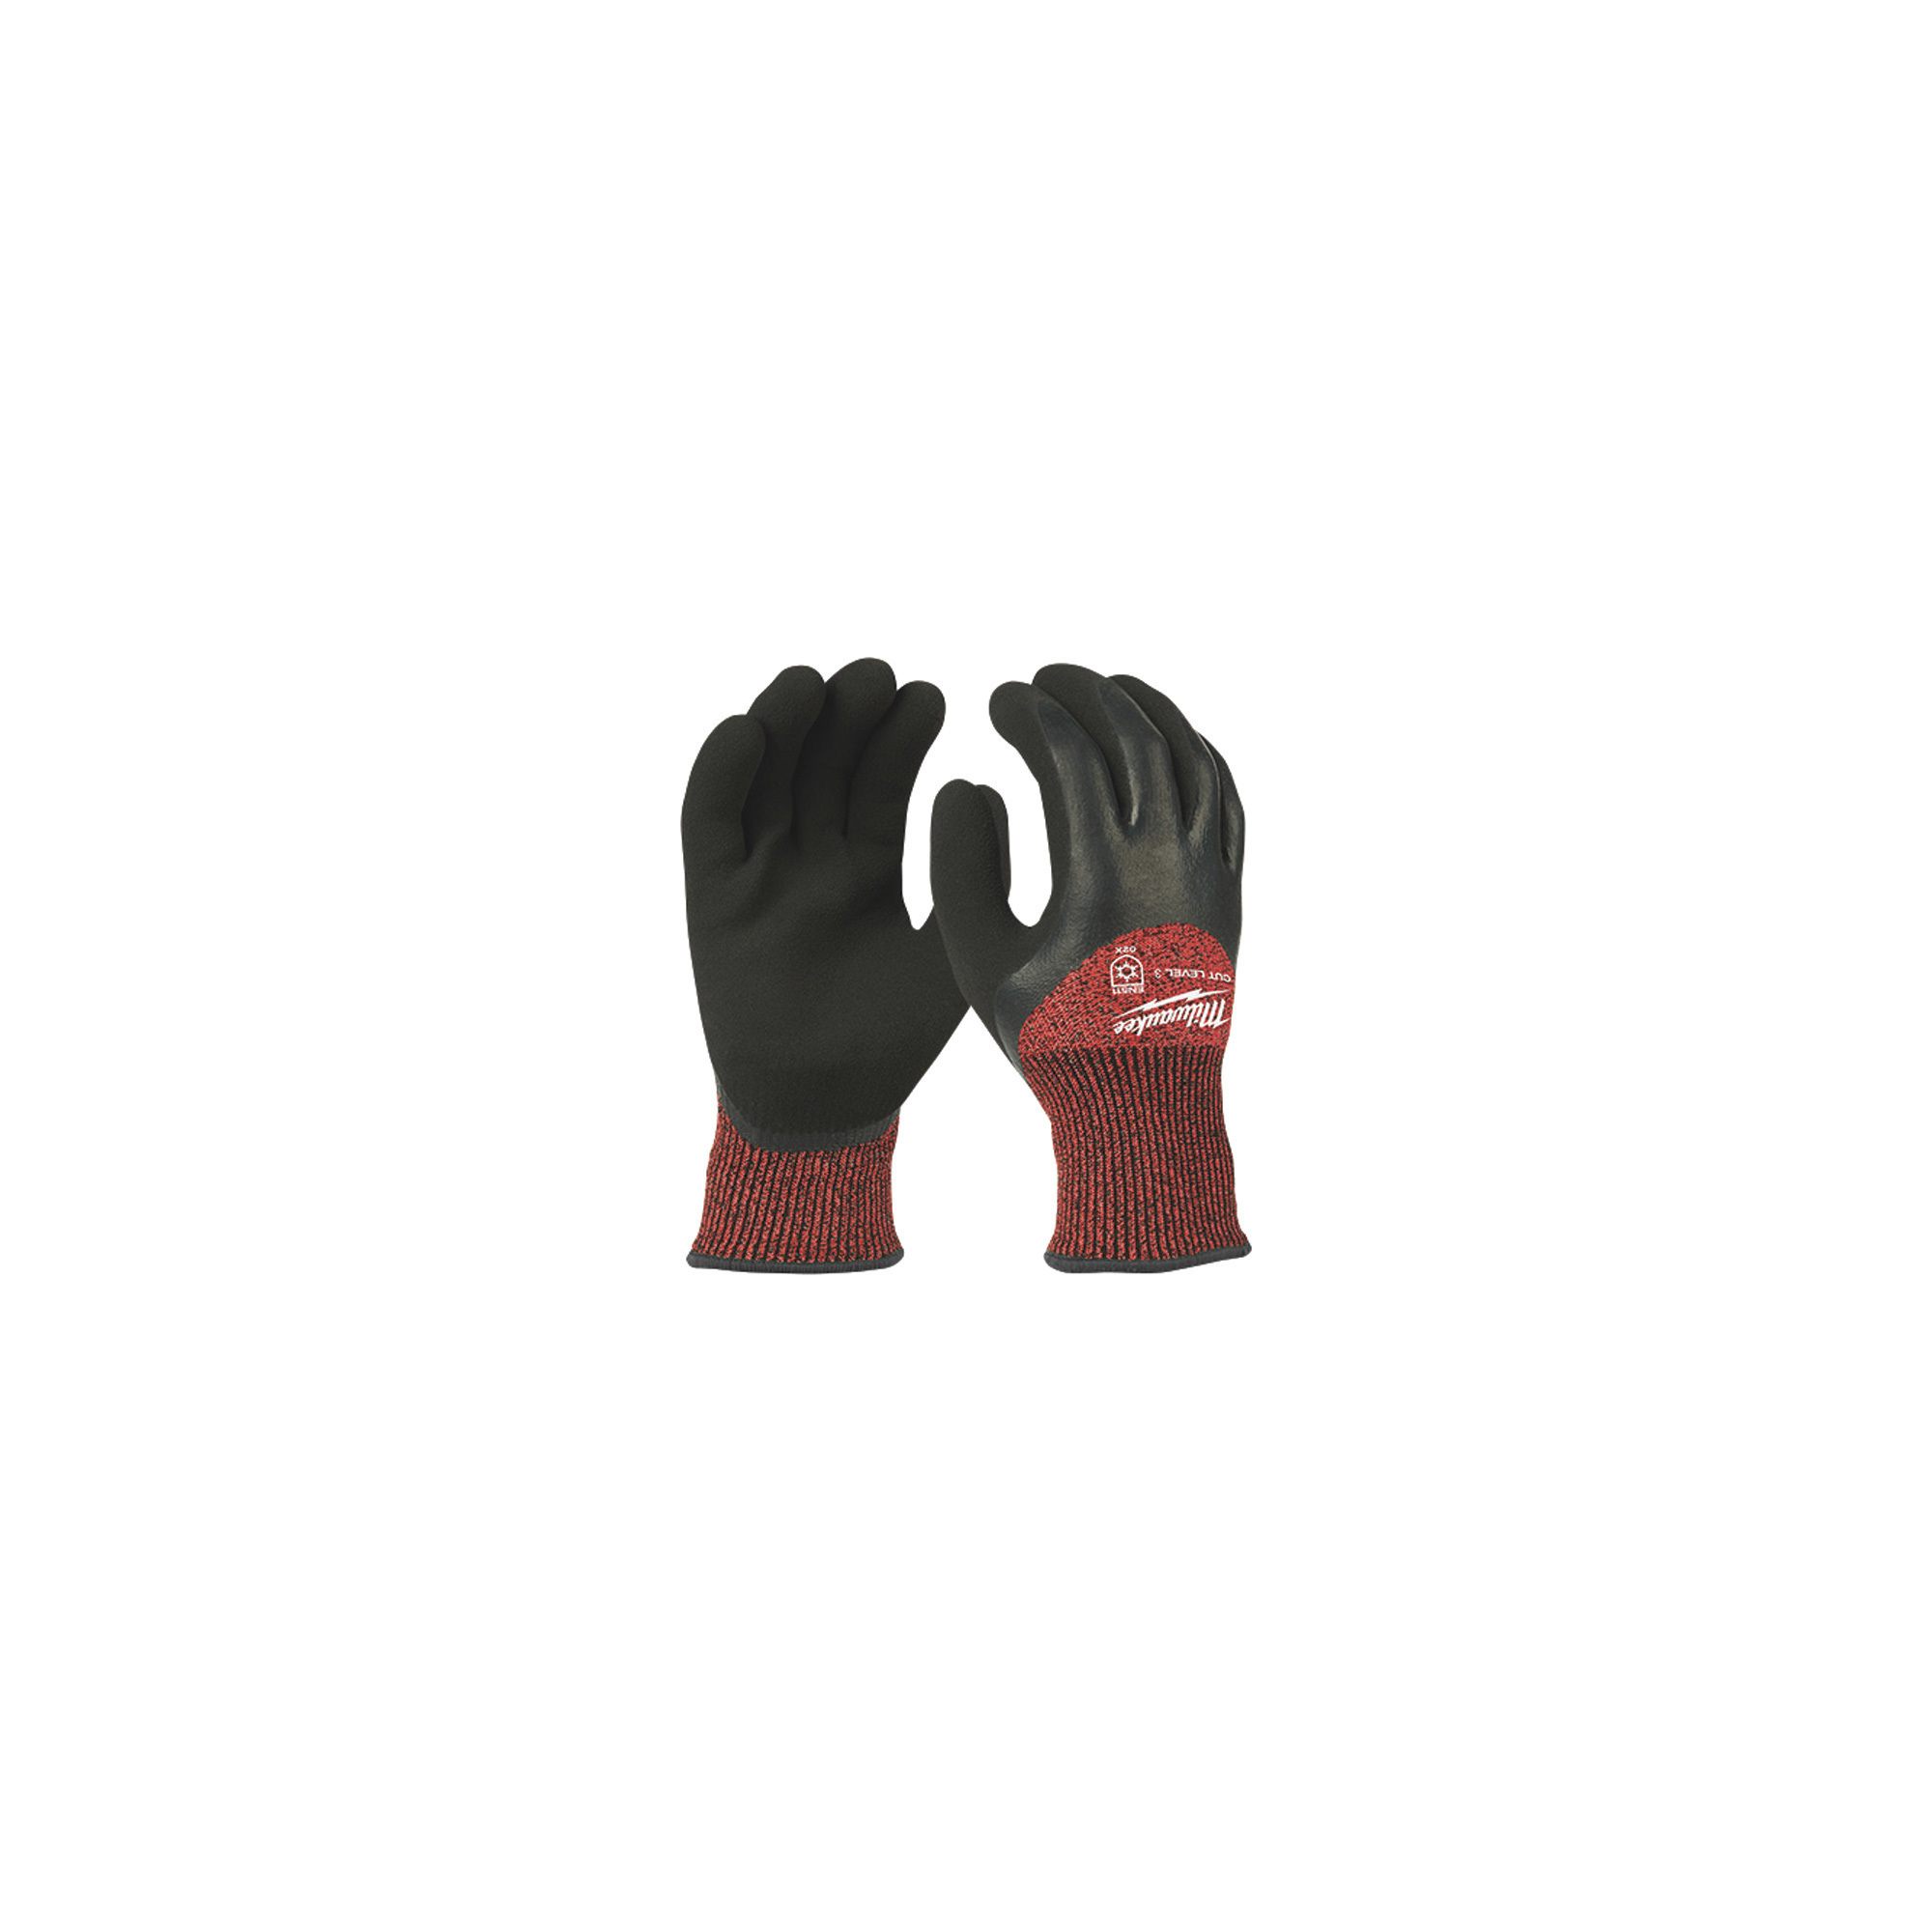 Winter Work Gloves from Milwaukee for Demolition and Construction